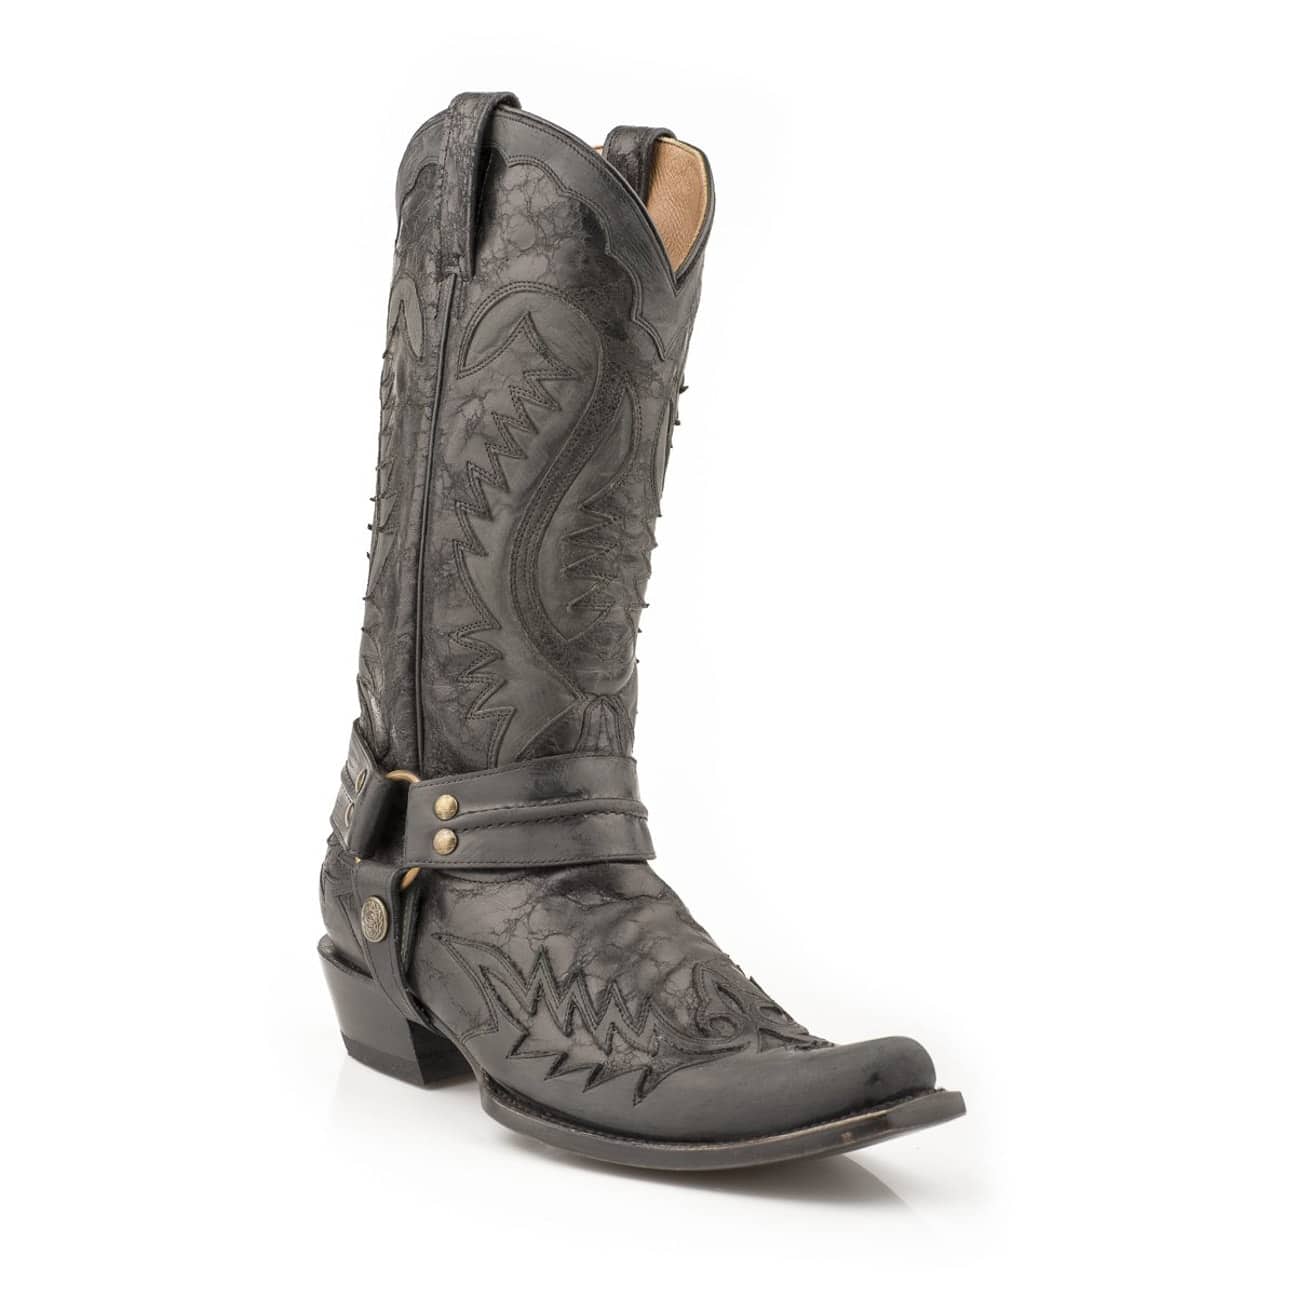 Stetson Cowboy Boot Distressed - 369,00 €